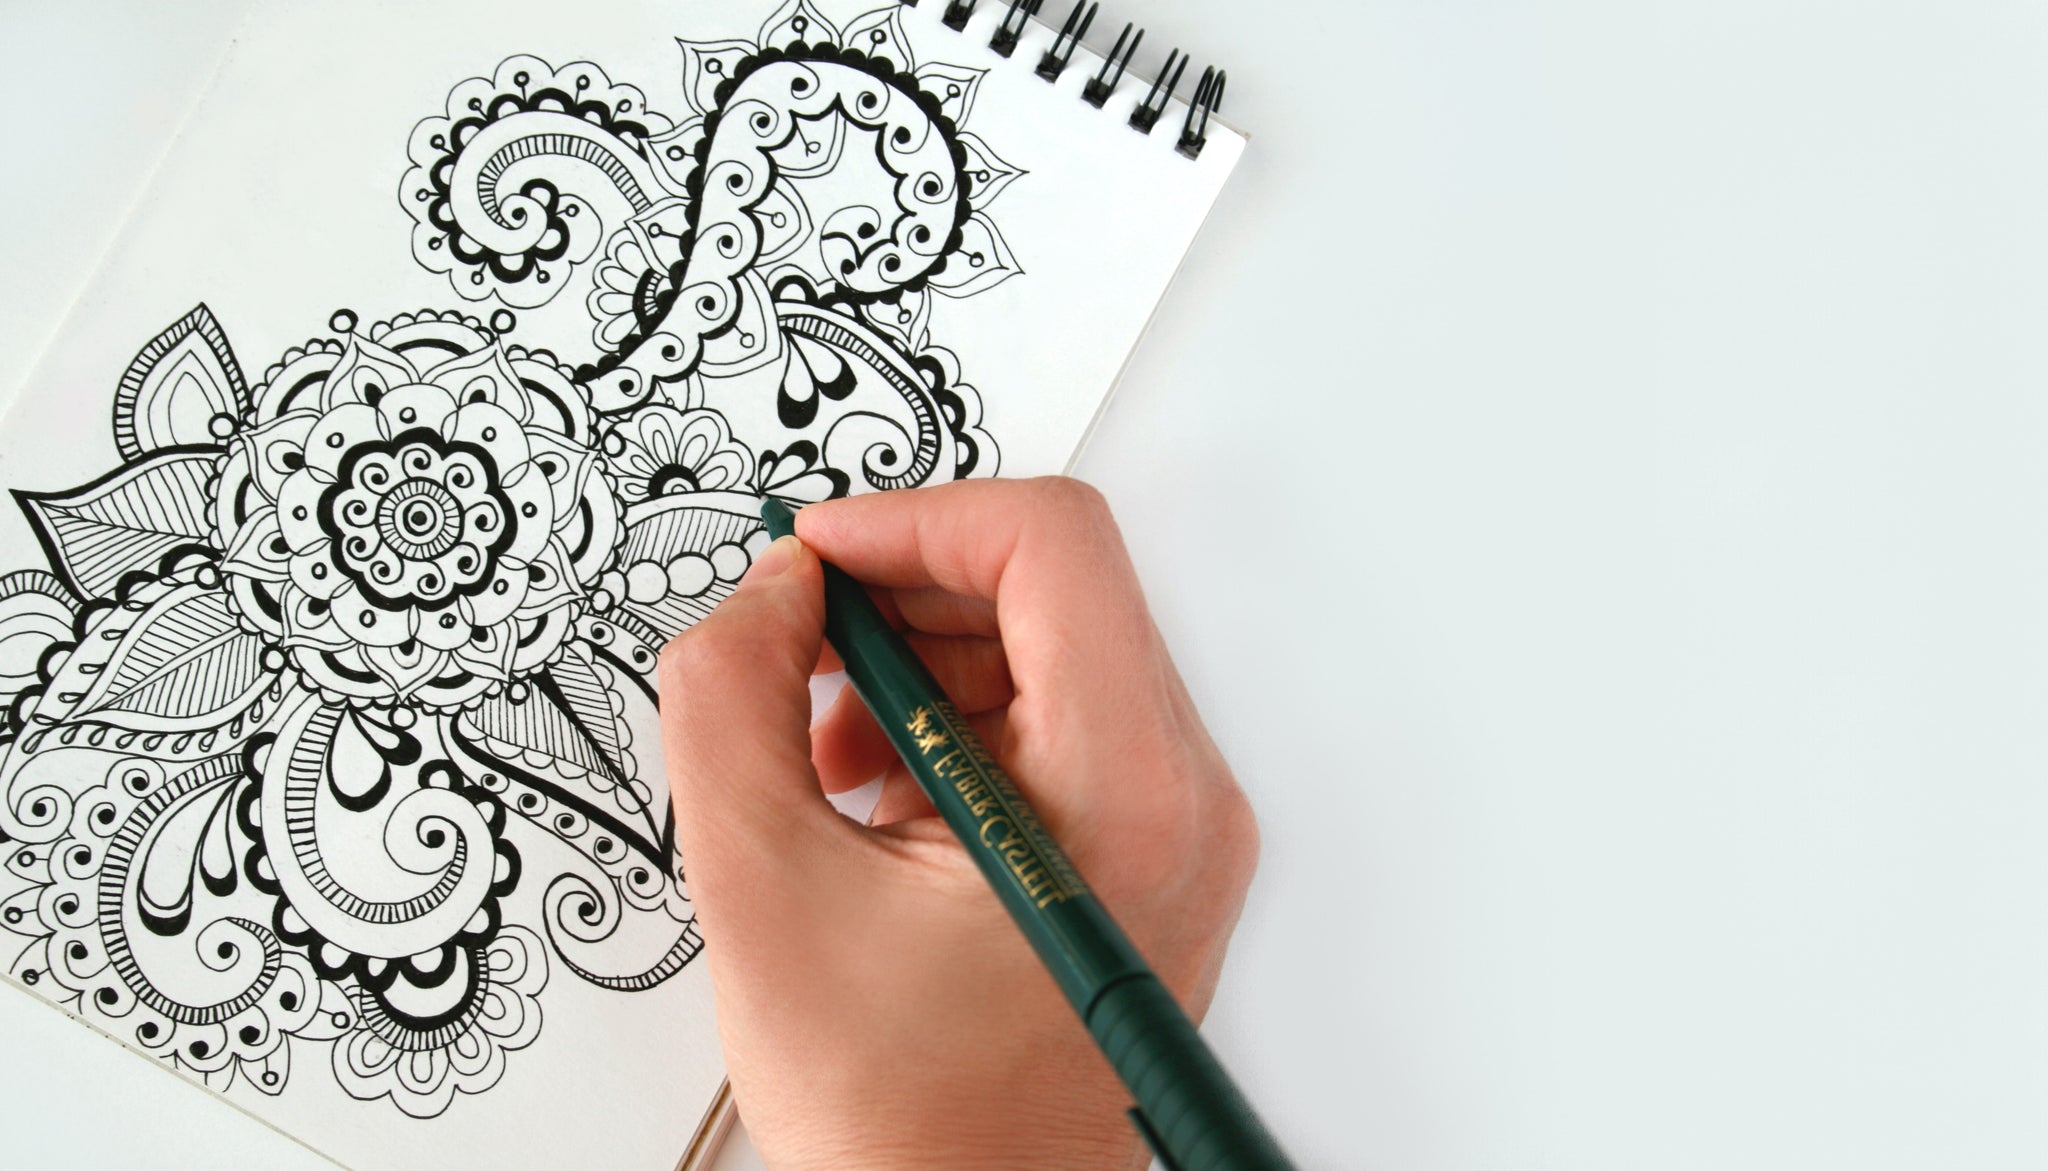 Creating Coloring Pages on Day 19